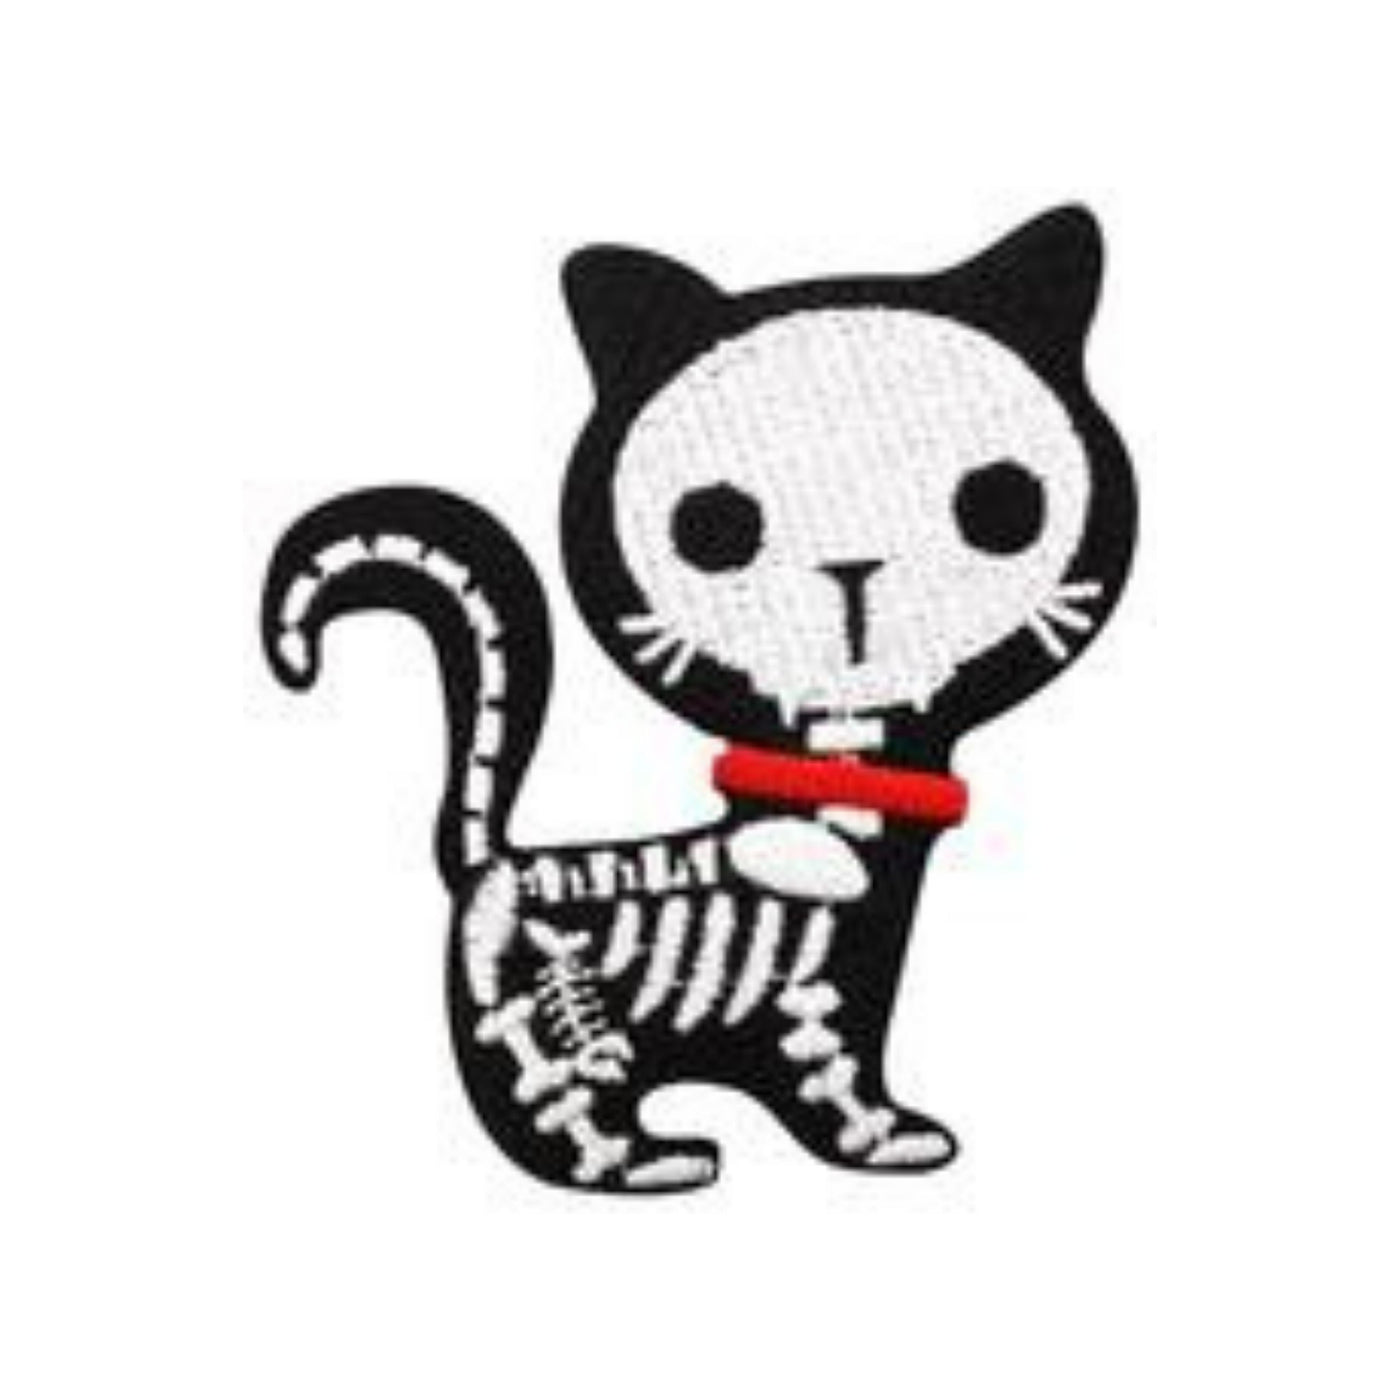 Skeleton Kitten Embroidered Patch - The Cranio Collections